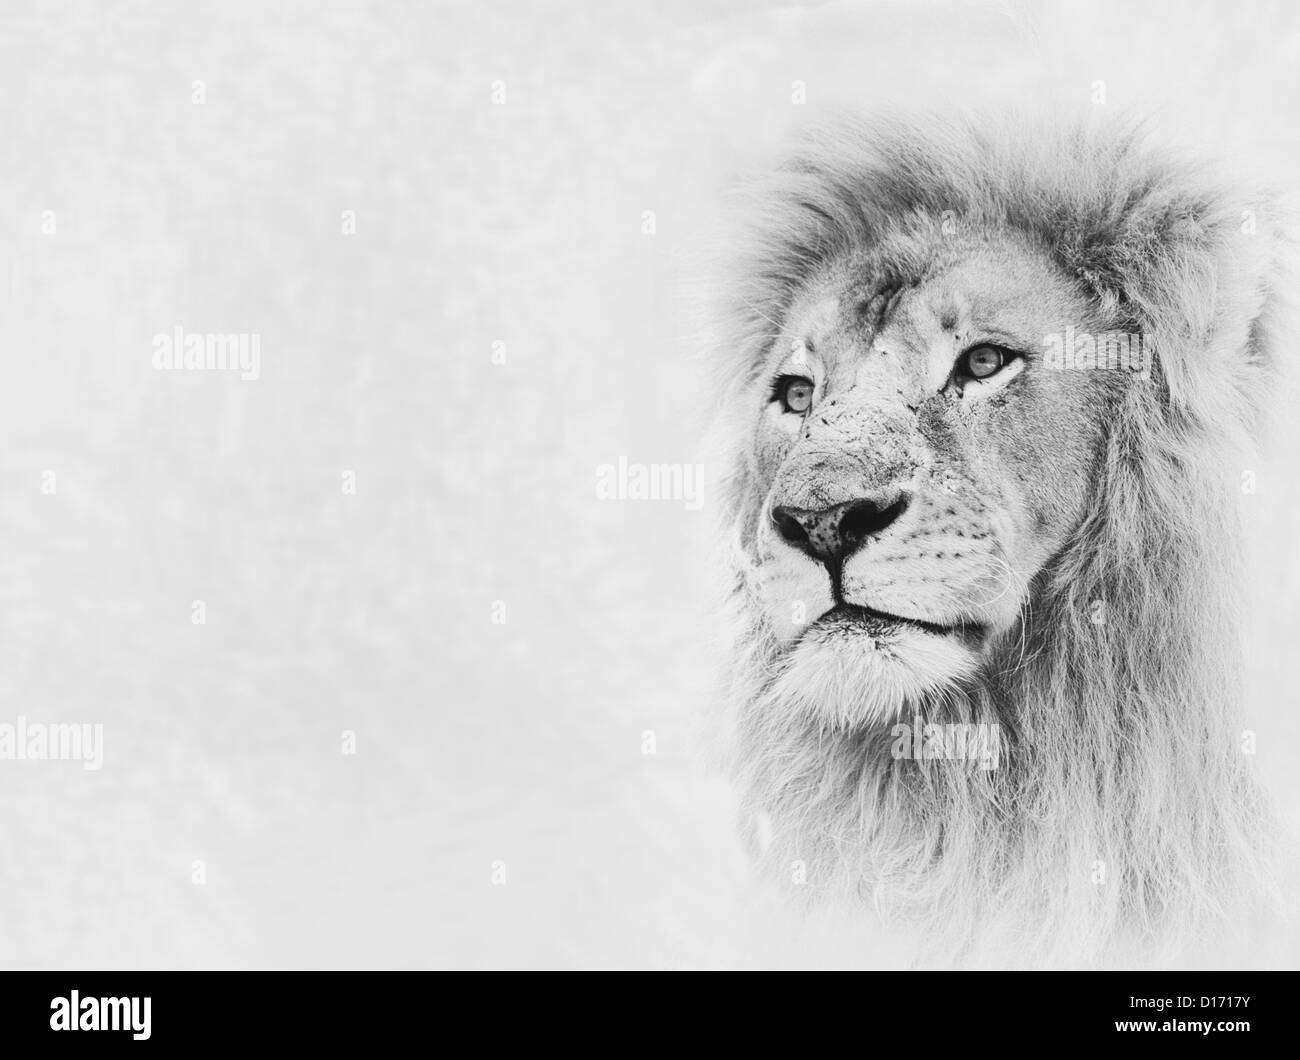 Black and White Image of Lion Face on Card Banner Stock Photo - Alamy